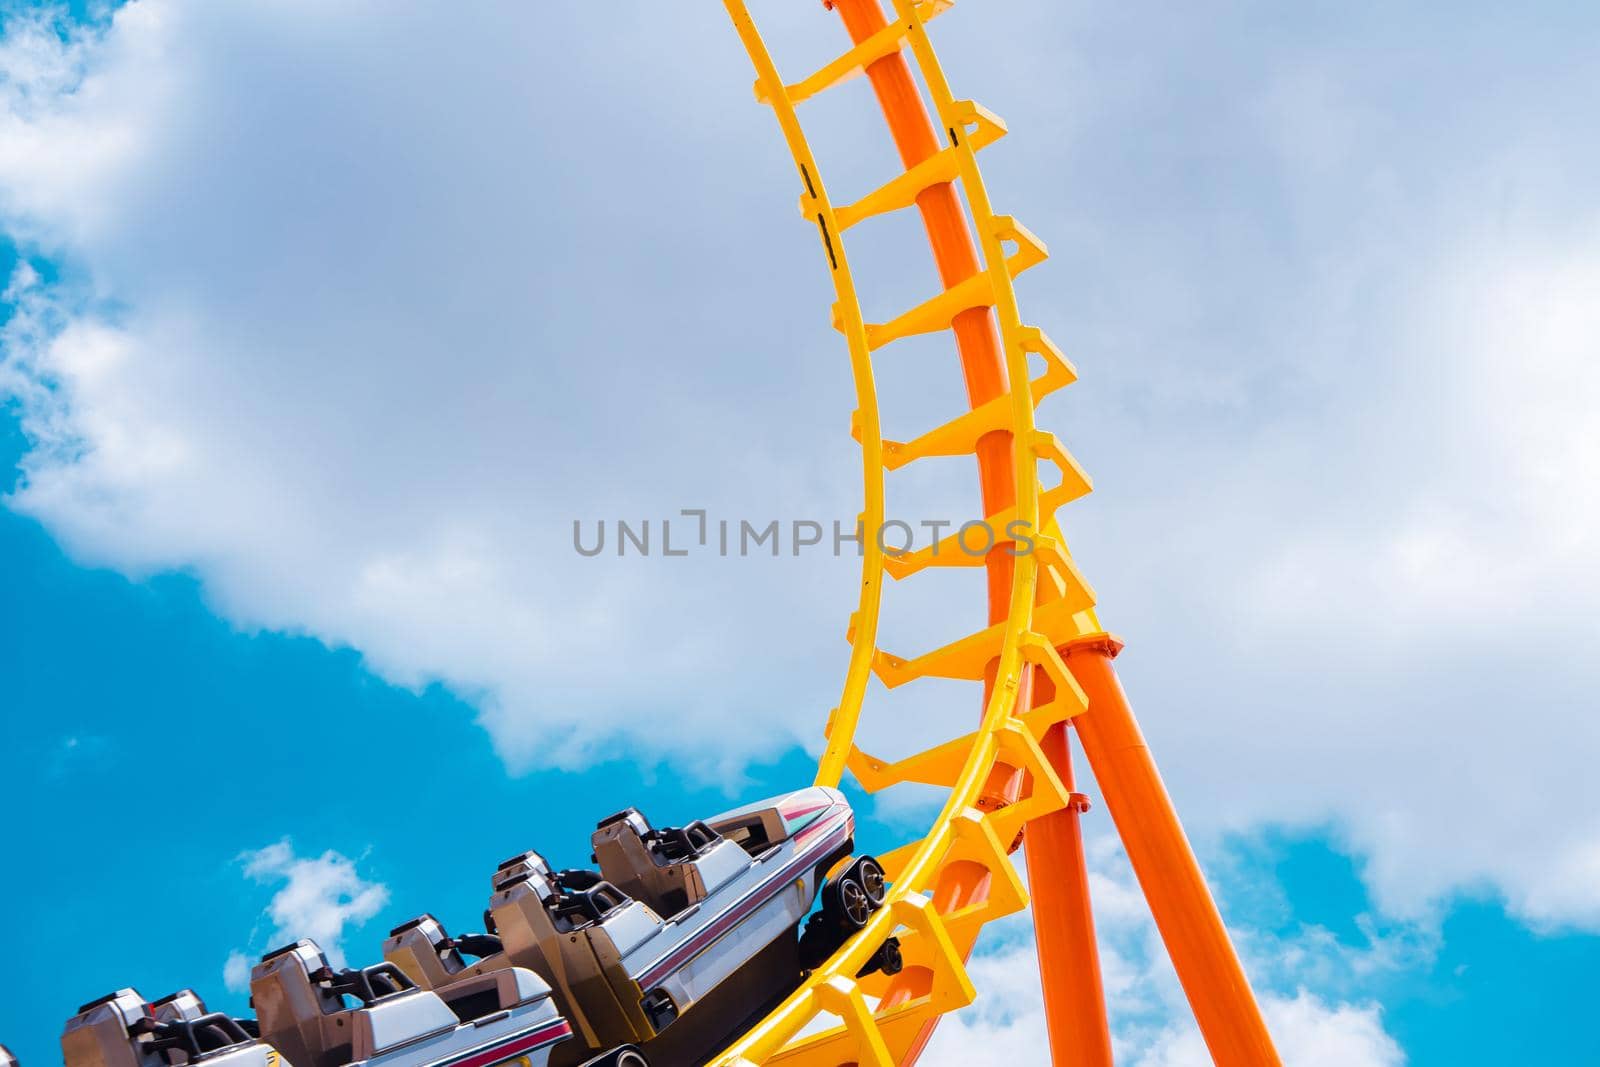 roller coaster high in the summer sky at theme park most excited fun and joyful playing machine by qualitystocks